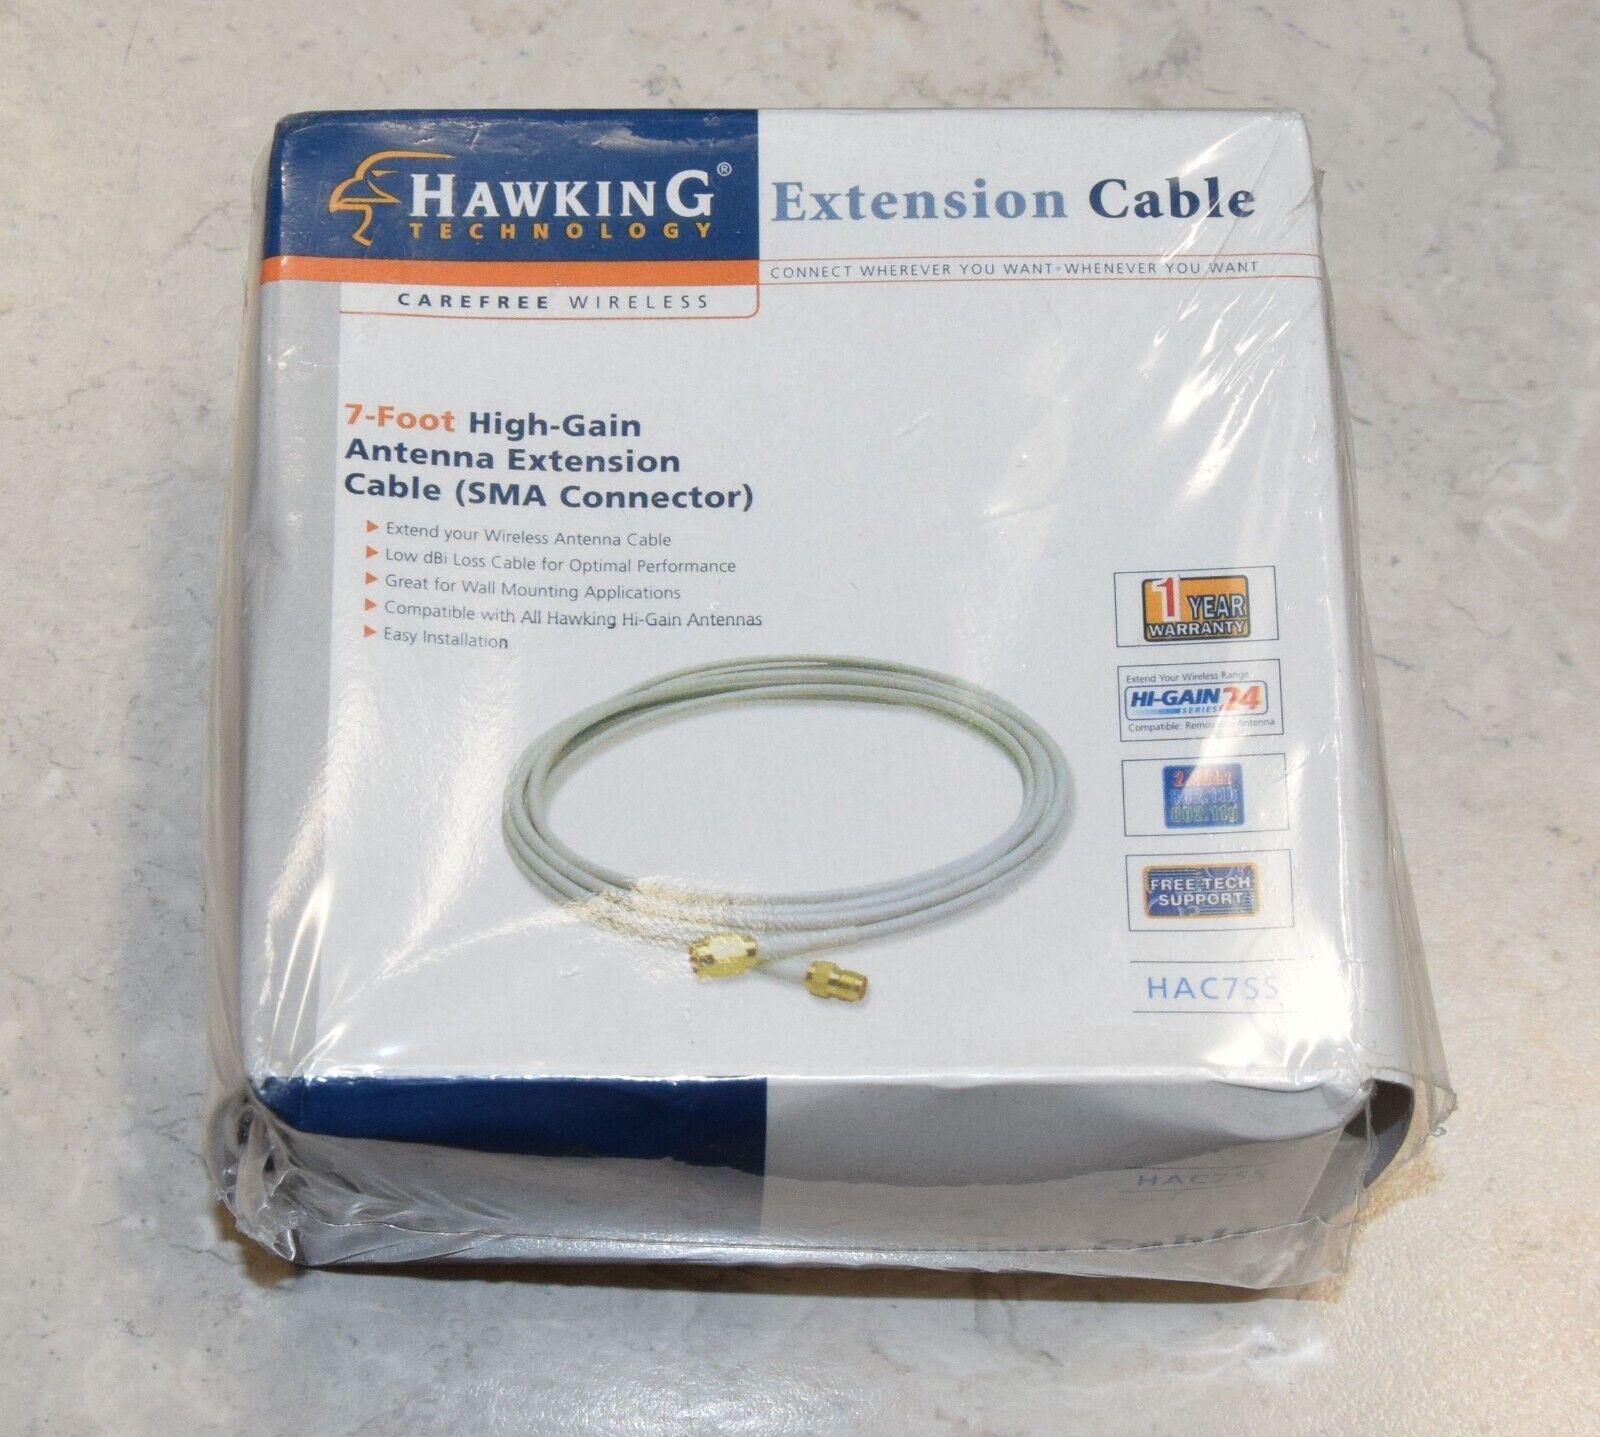 New Hawking HAC7SS 7-Foot High Gain Antenna Extension Cable SMA Connector